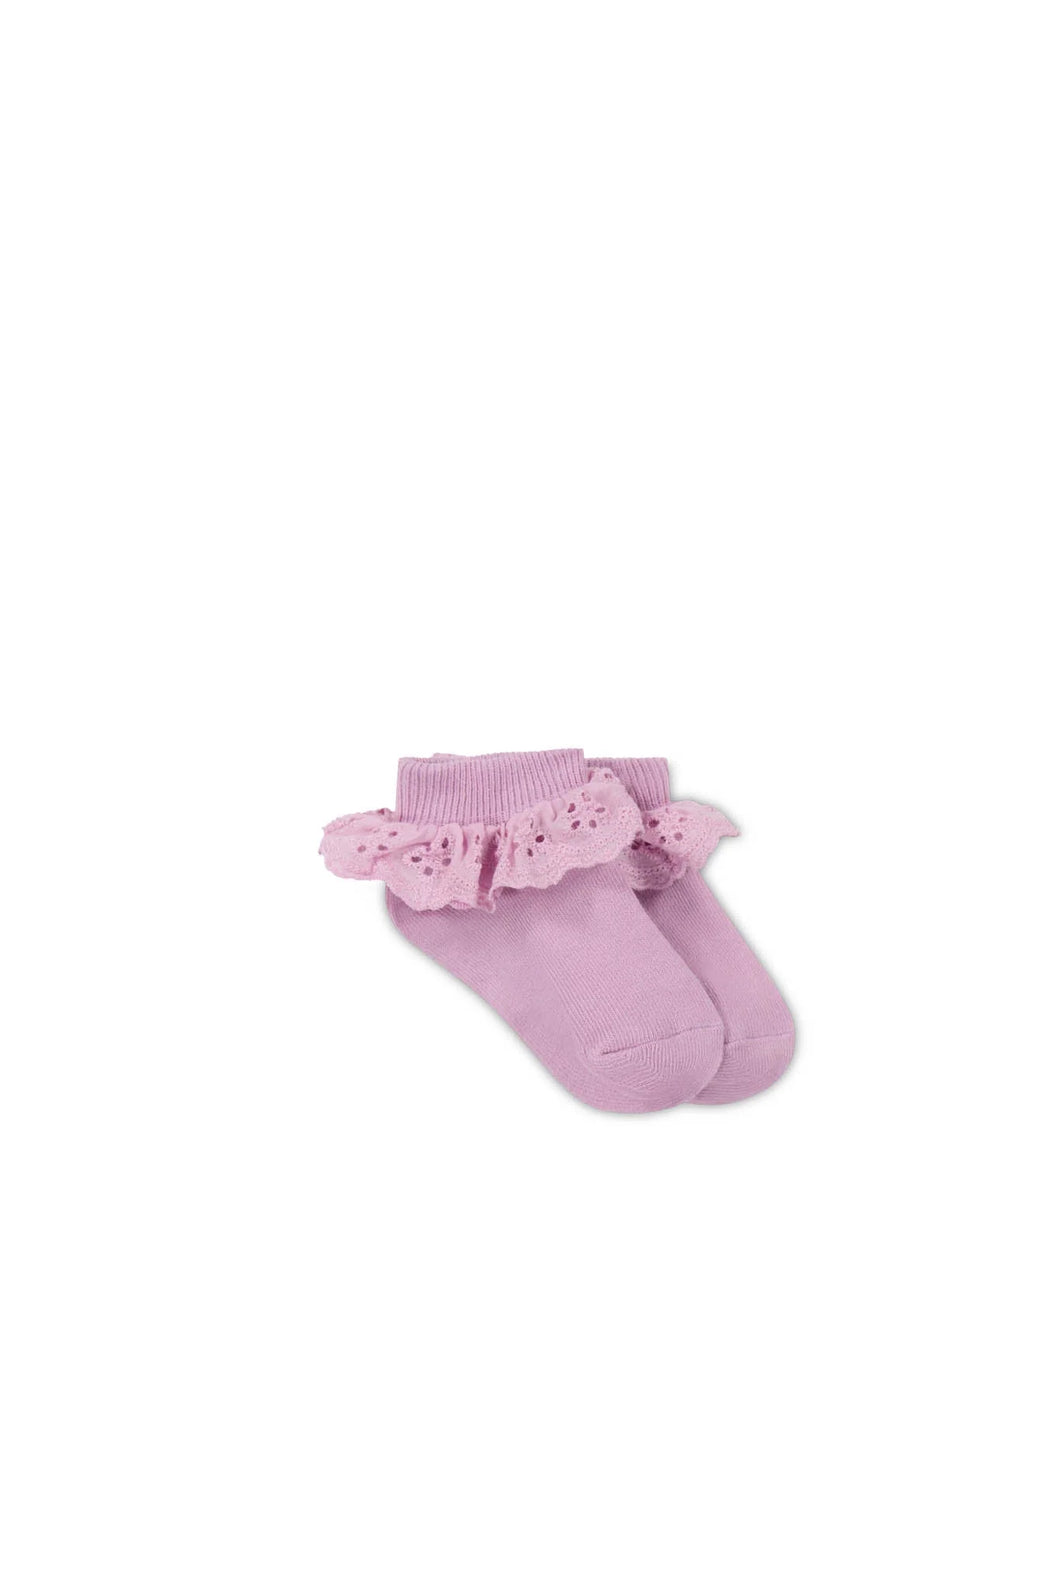 Frill Ankle Sock - Lilac Blush